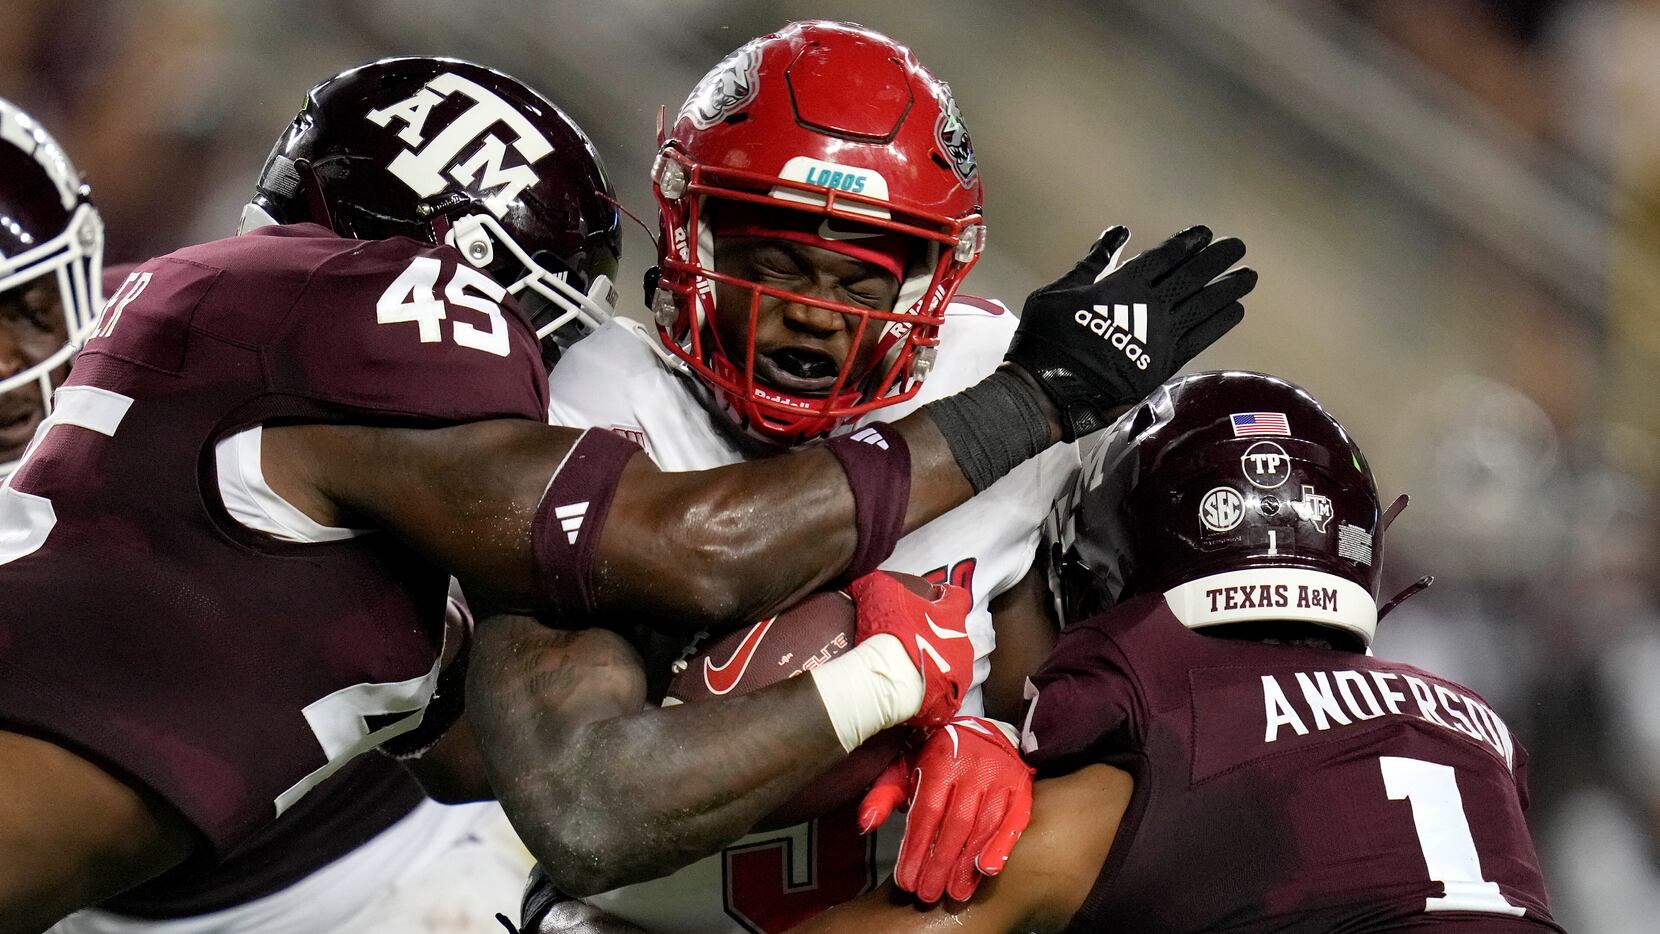 New Mexico running back Jacory Croskey-Merritt (5) is tackled by Texas A&M linebacker...